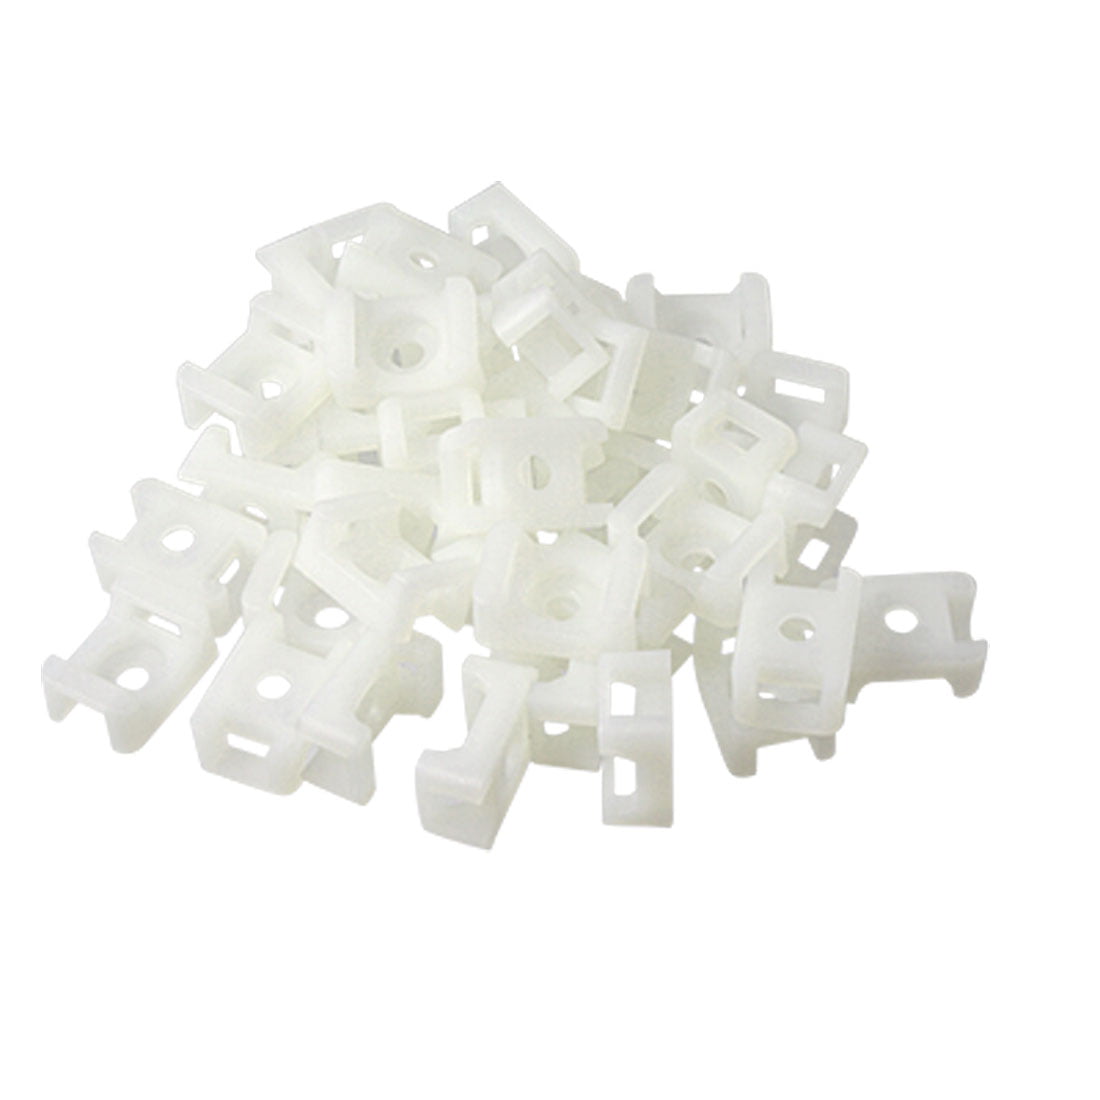 XLX 100pcs White Nylon R-Type Cable Clamp Fastener for 6.35mm Dia Wire Tube Plastic Wire Cord Clip Fixer with 100 Pack Screws for Wire Management 1/4